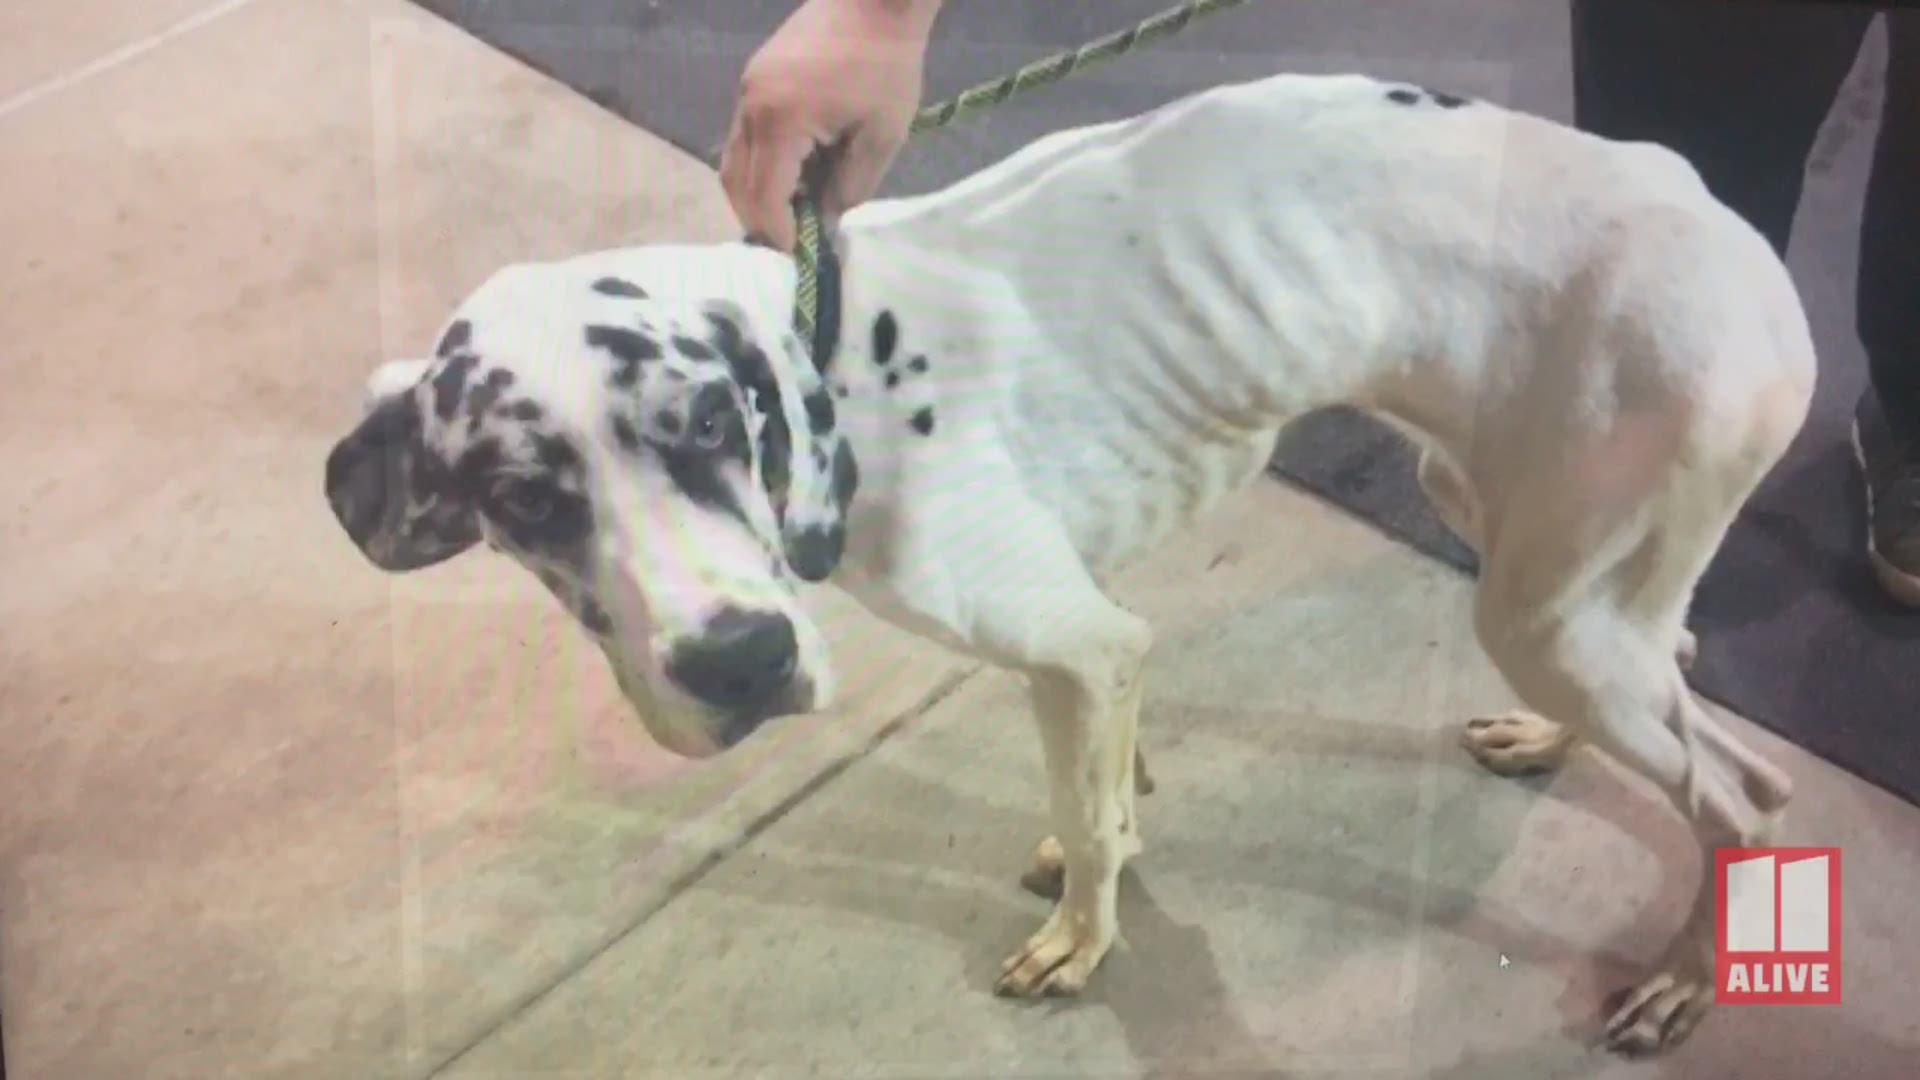 Duncan, a Great Dane, was sent to work with a trainer in Tennessee for 4 weeks and was returned emaciated, according to his owner. The trainer, Stephen Kinder, is now facing four counts of animal cruelty in Dalton.